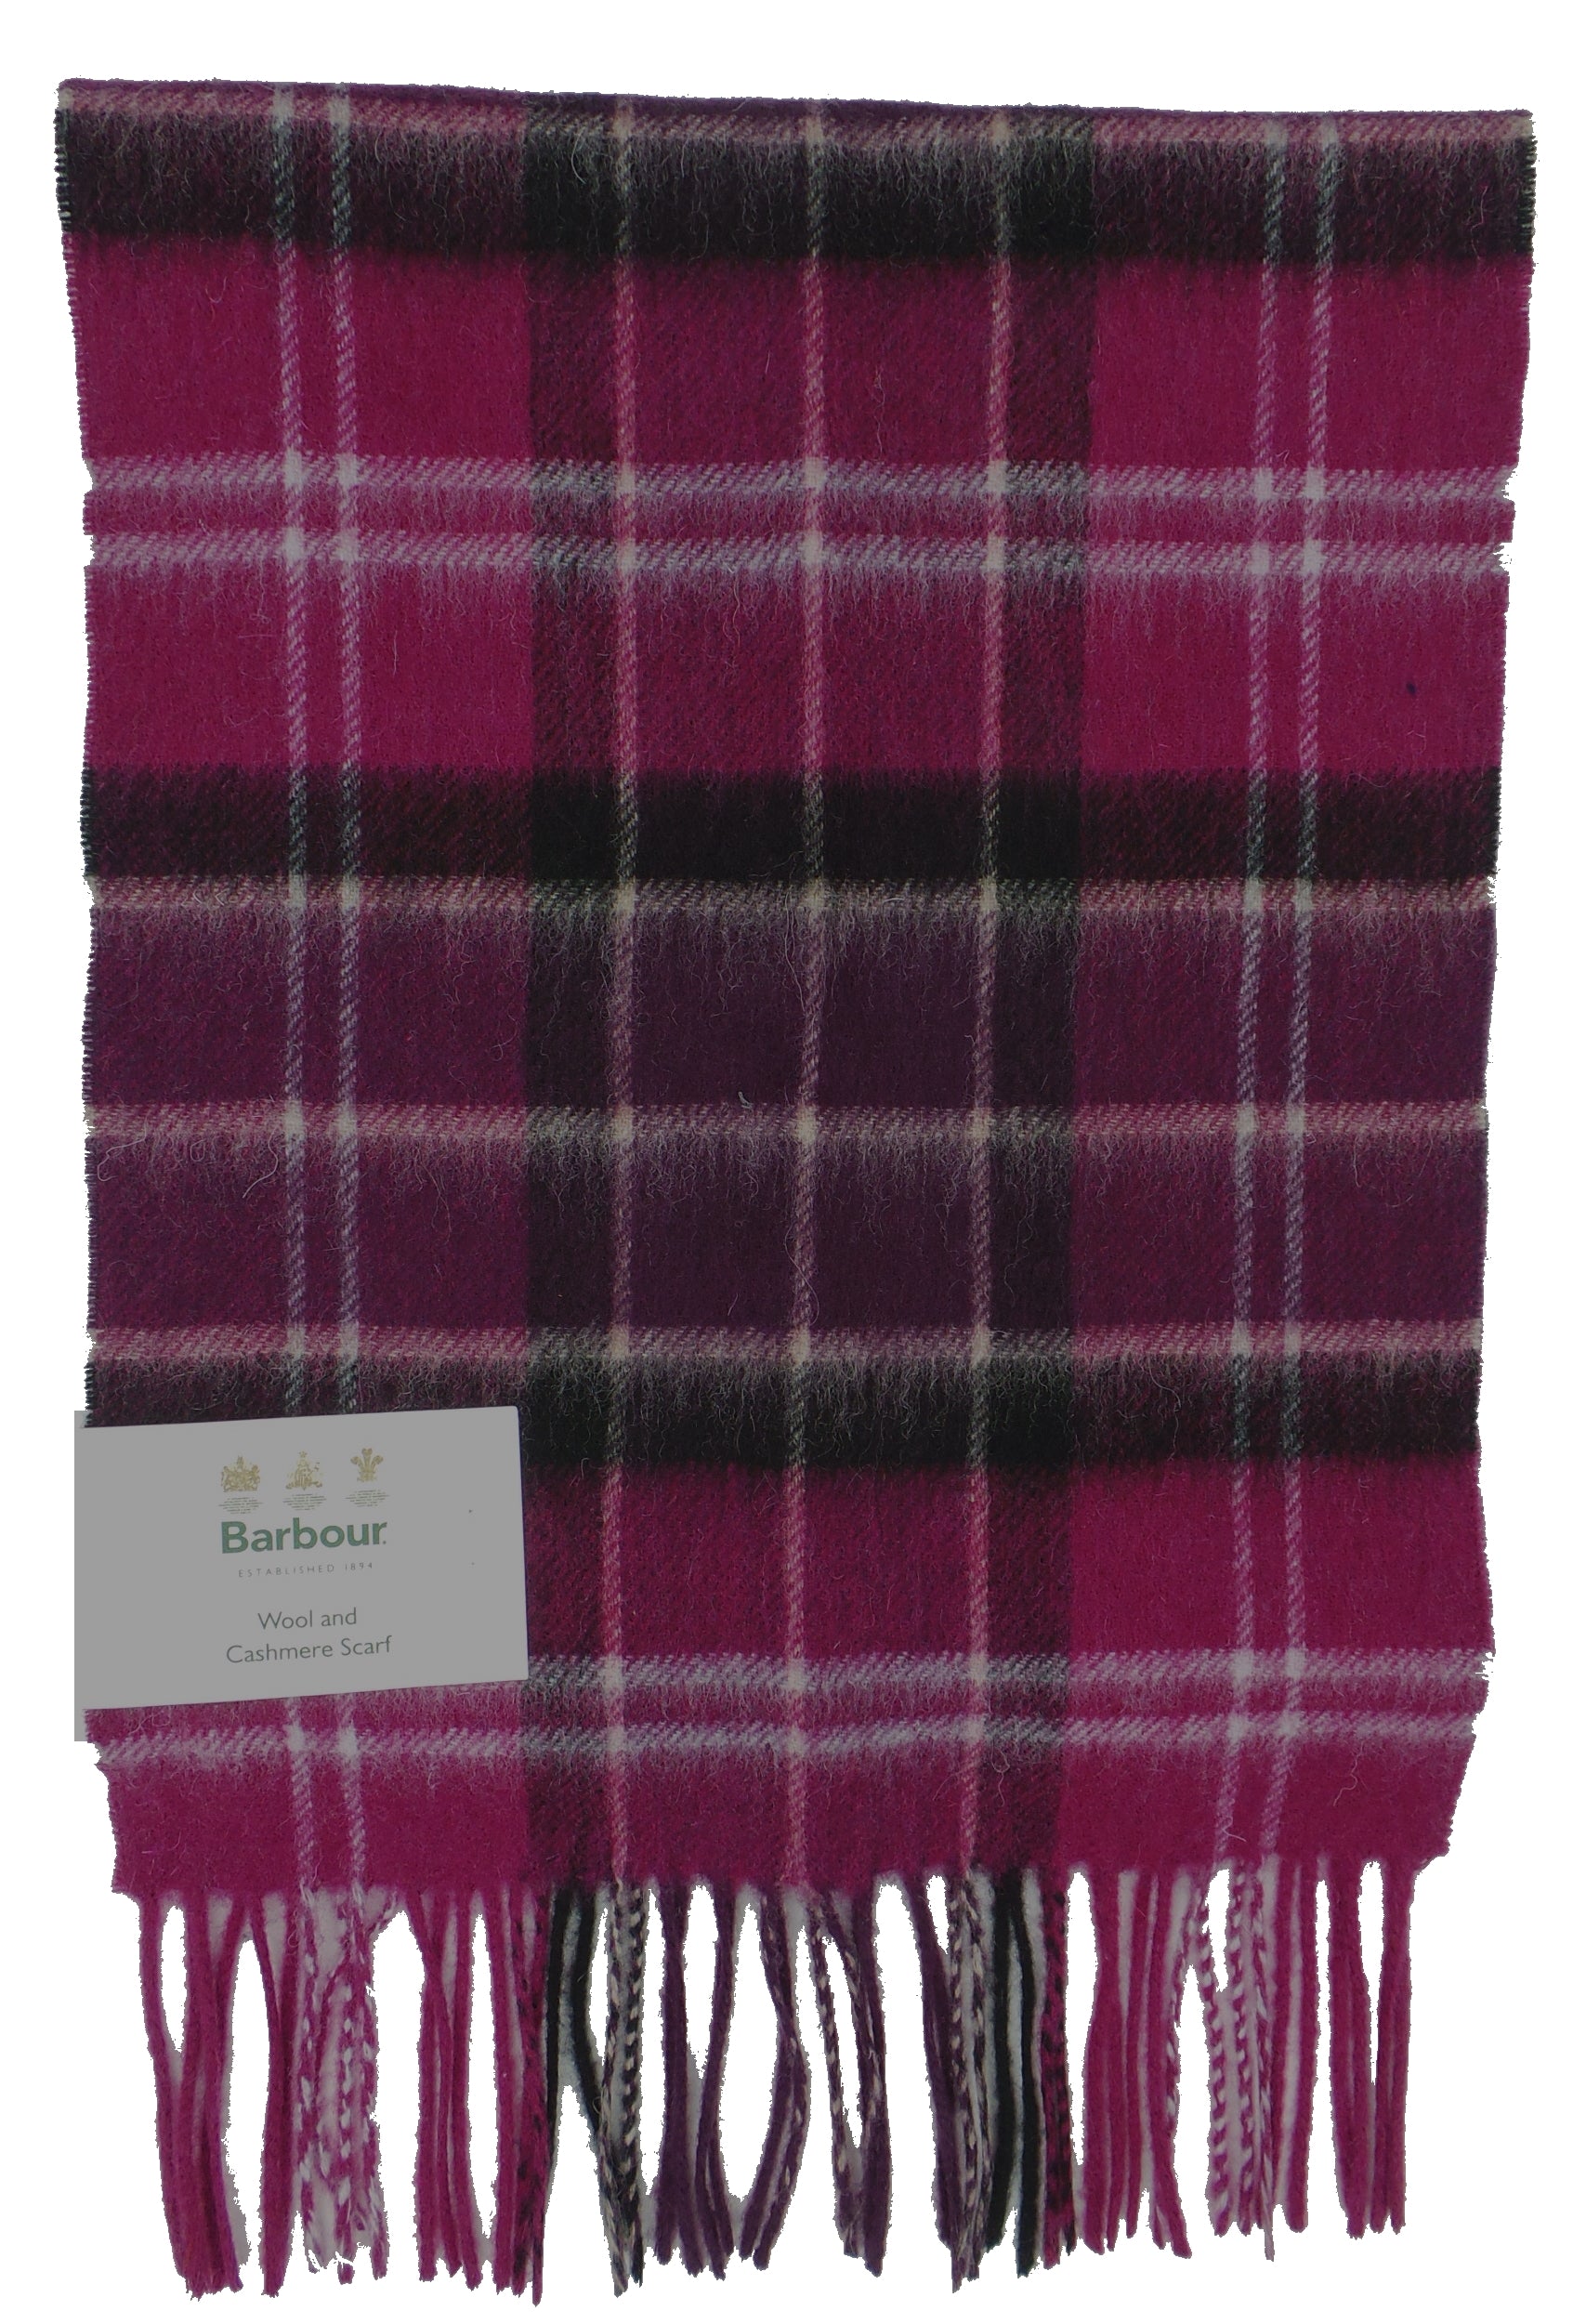 Barbour Lambswool and Cashmere Soft Tartan Scarf